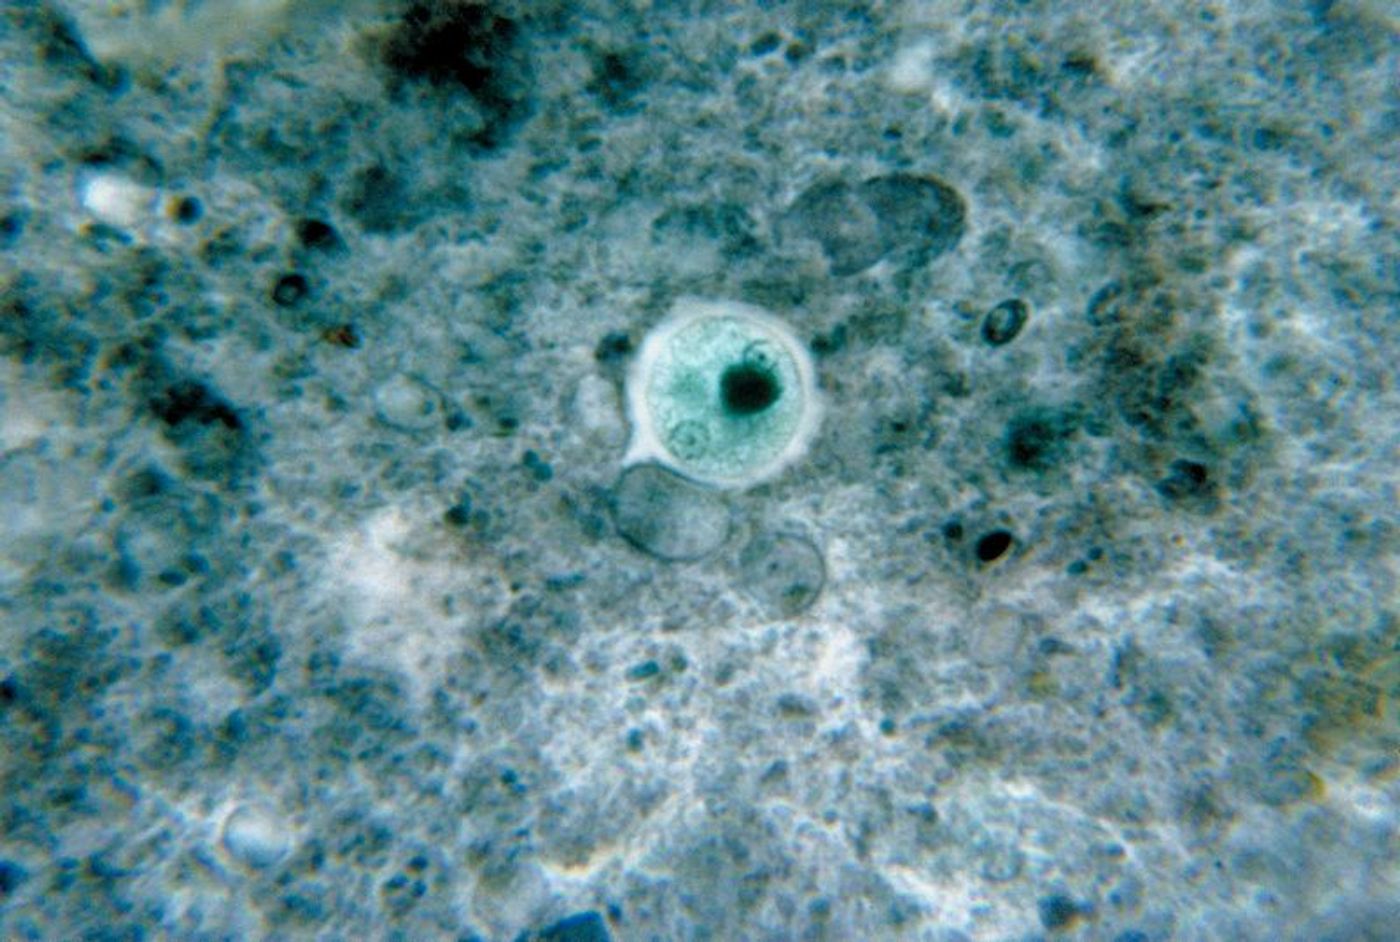 An Entamoeba histolytica cyst in a micrograph stained with chlorazol black. Credit: CDC/ Dr. George Healy